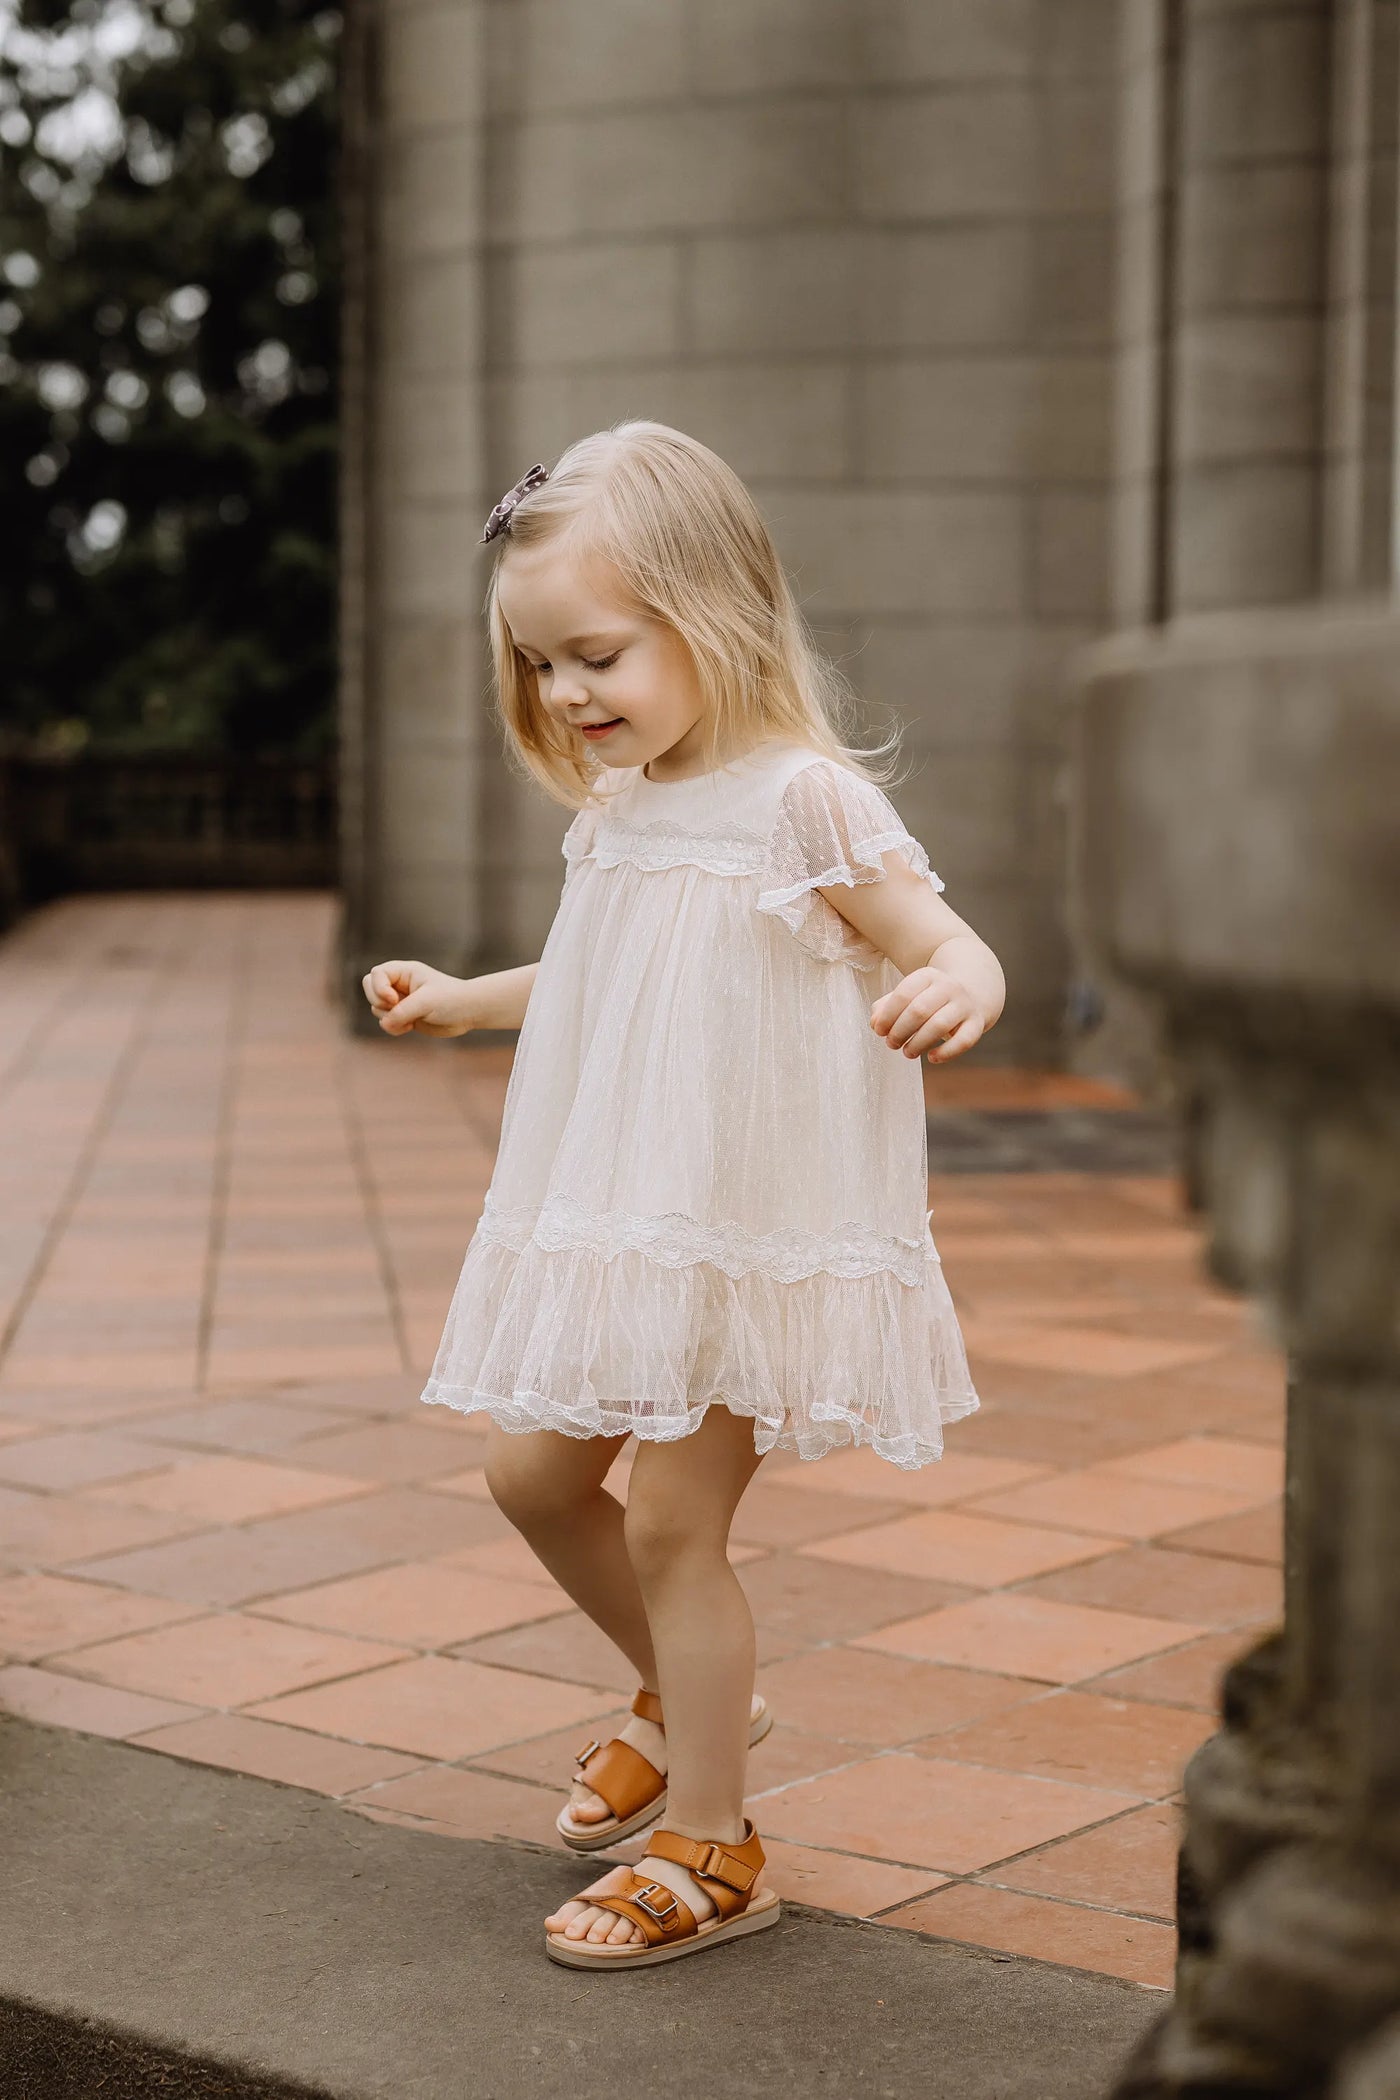 Tulle and Lace Breezy Dress